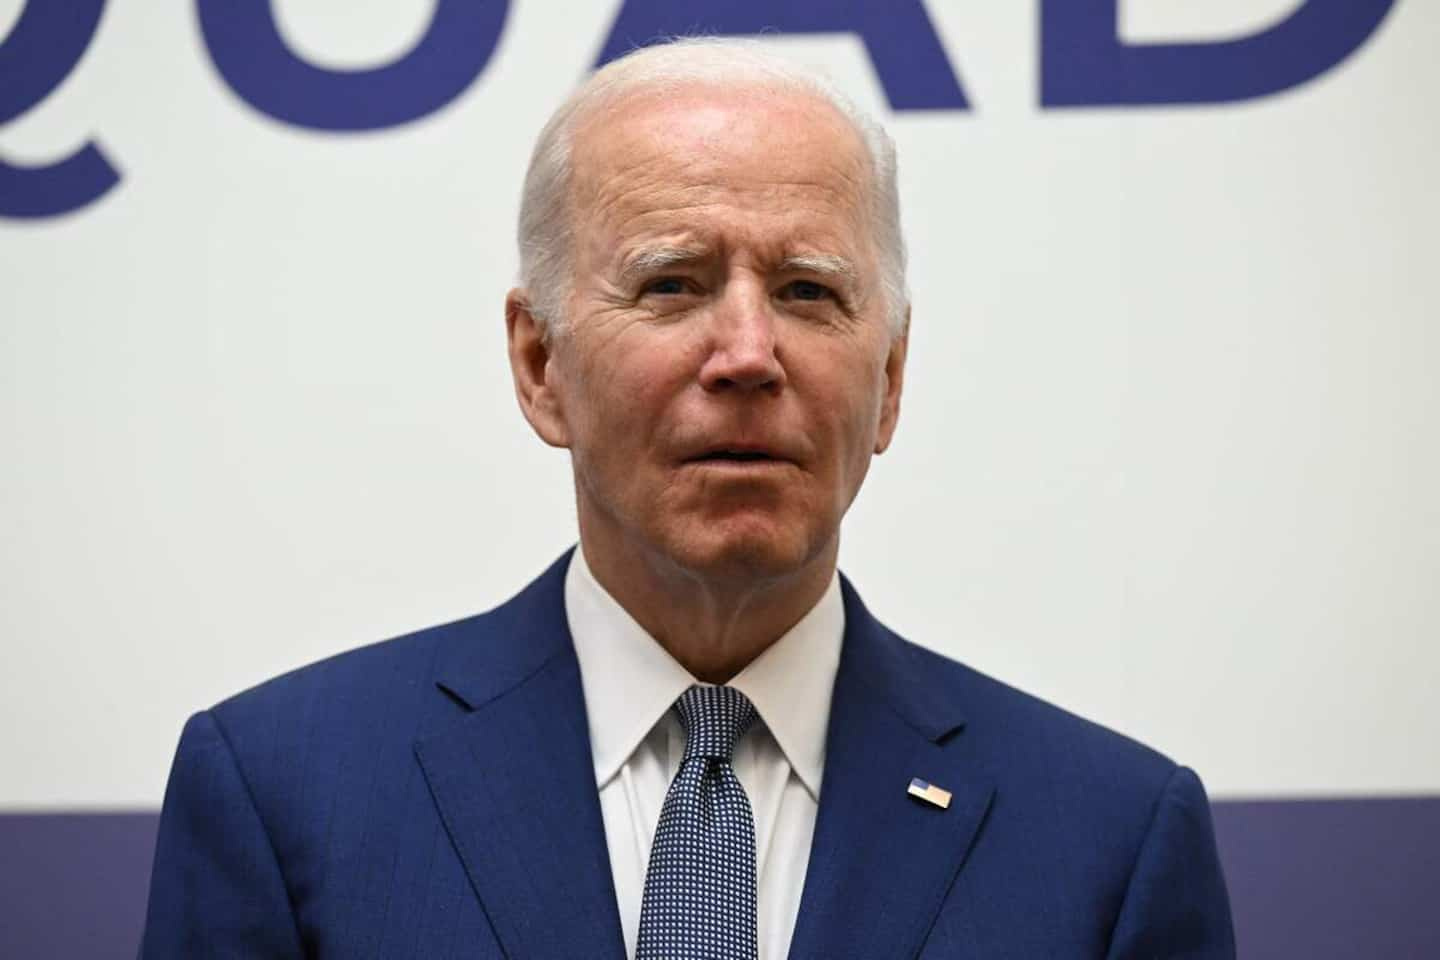 Biden, with COVID-19, can resume physical exercise